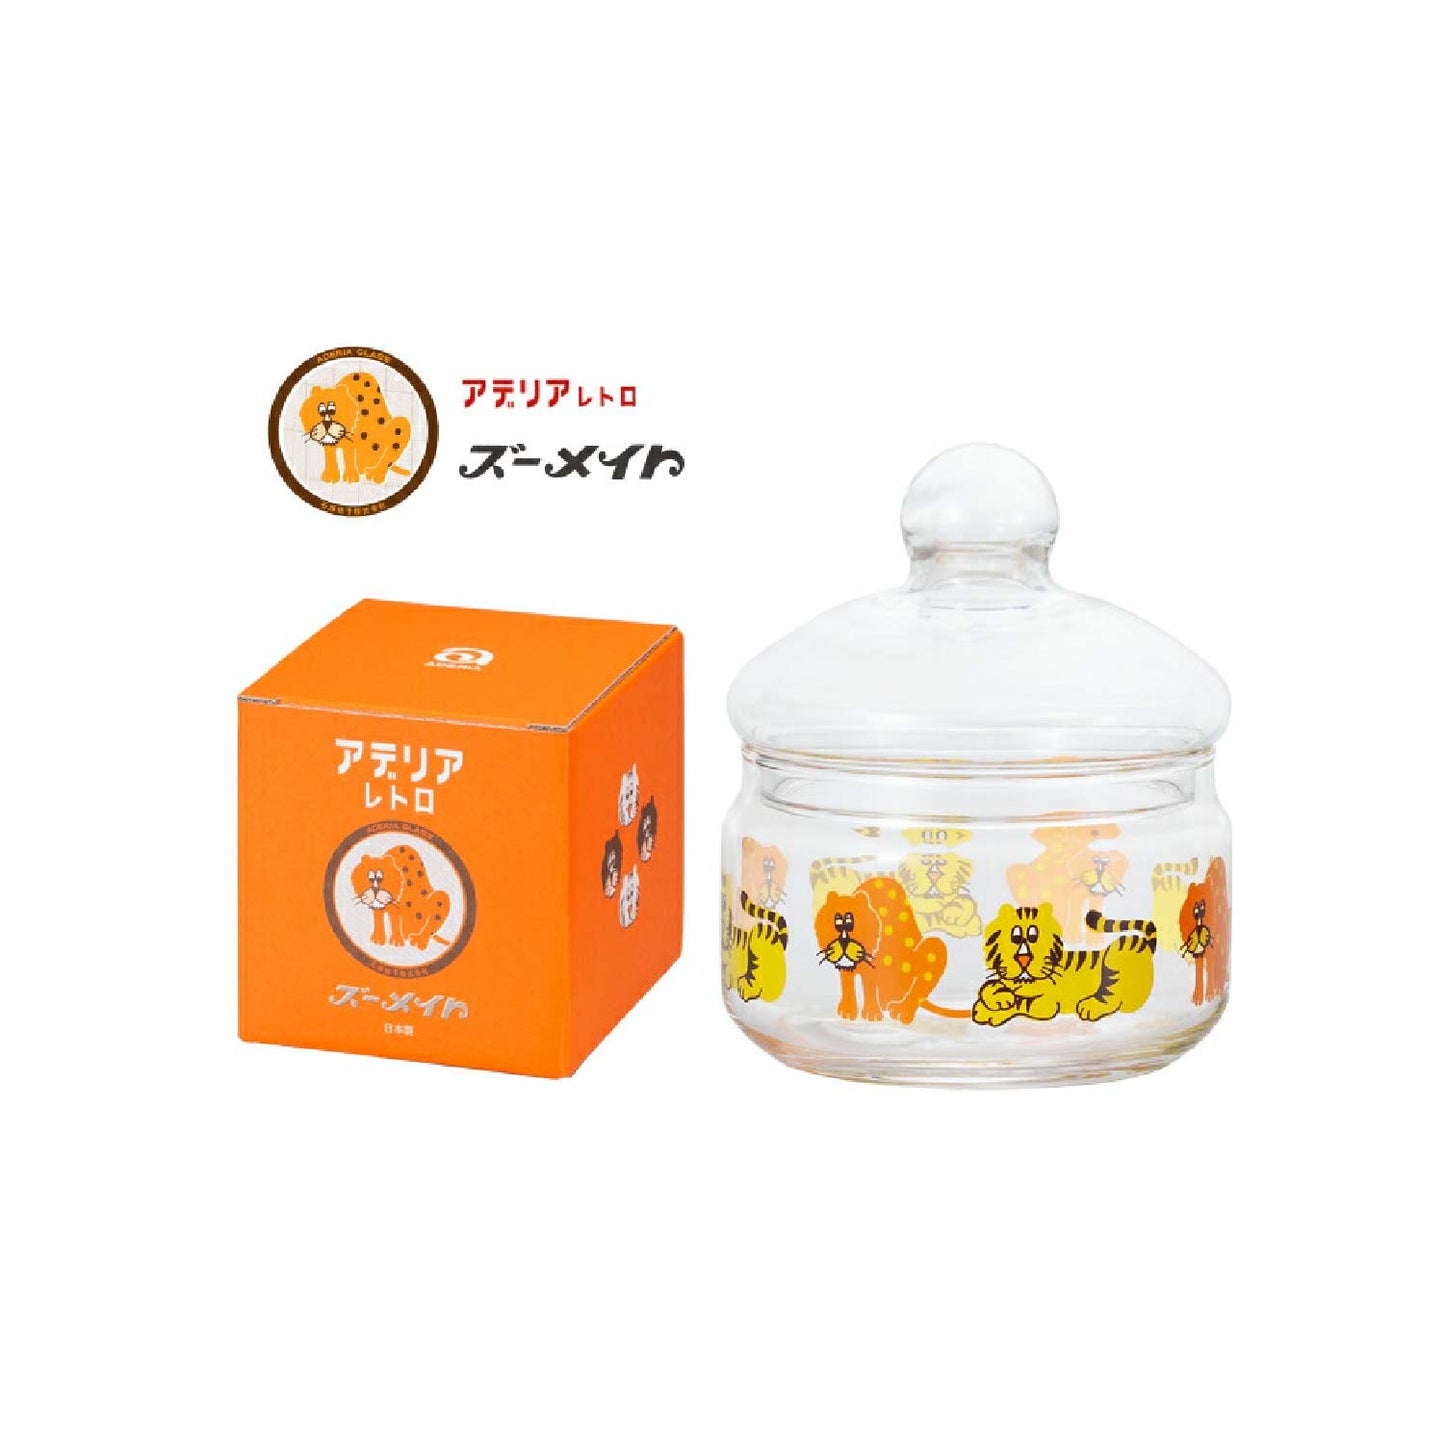 Aderia Retro Zoomate Tiger and Leopard Glass Canister with Lid